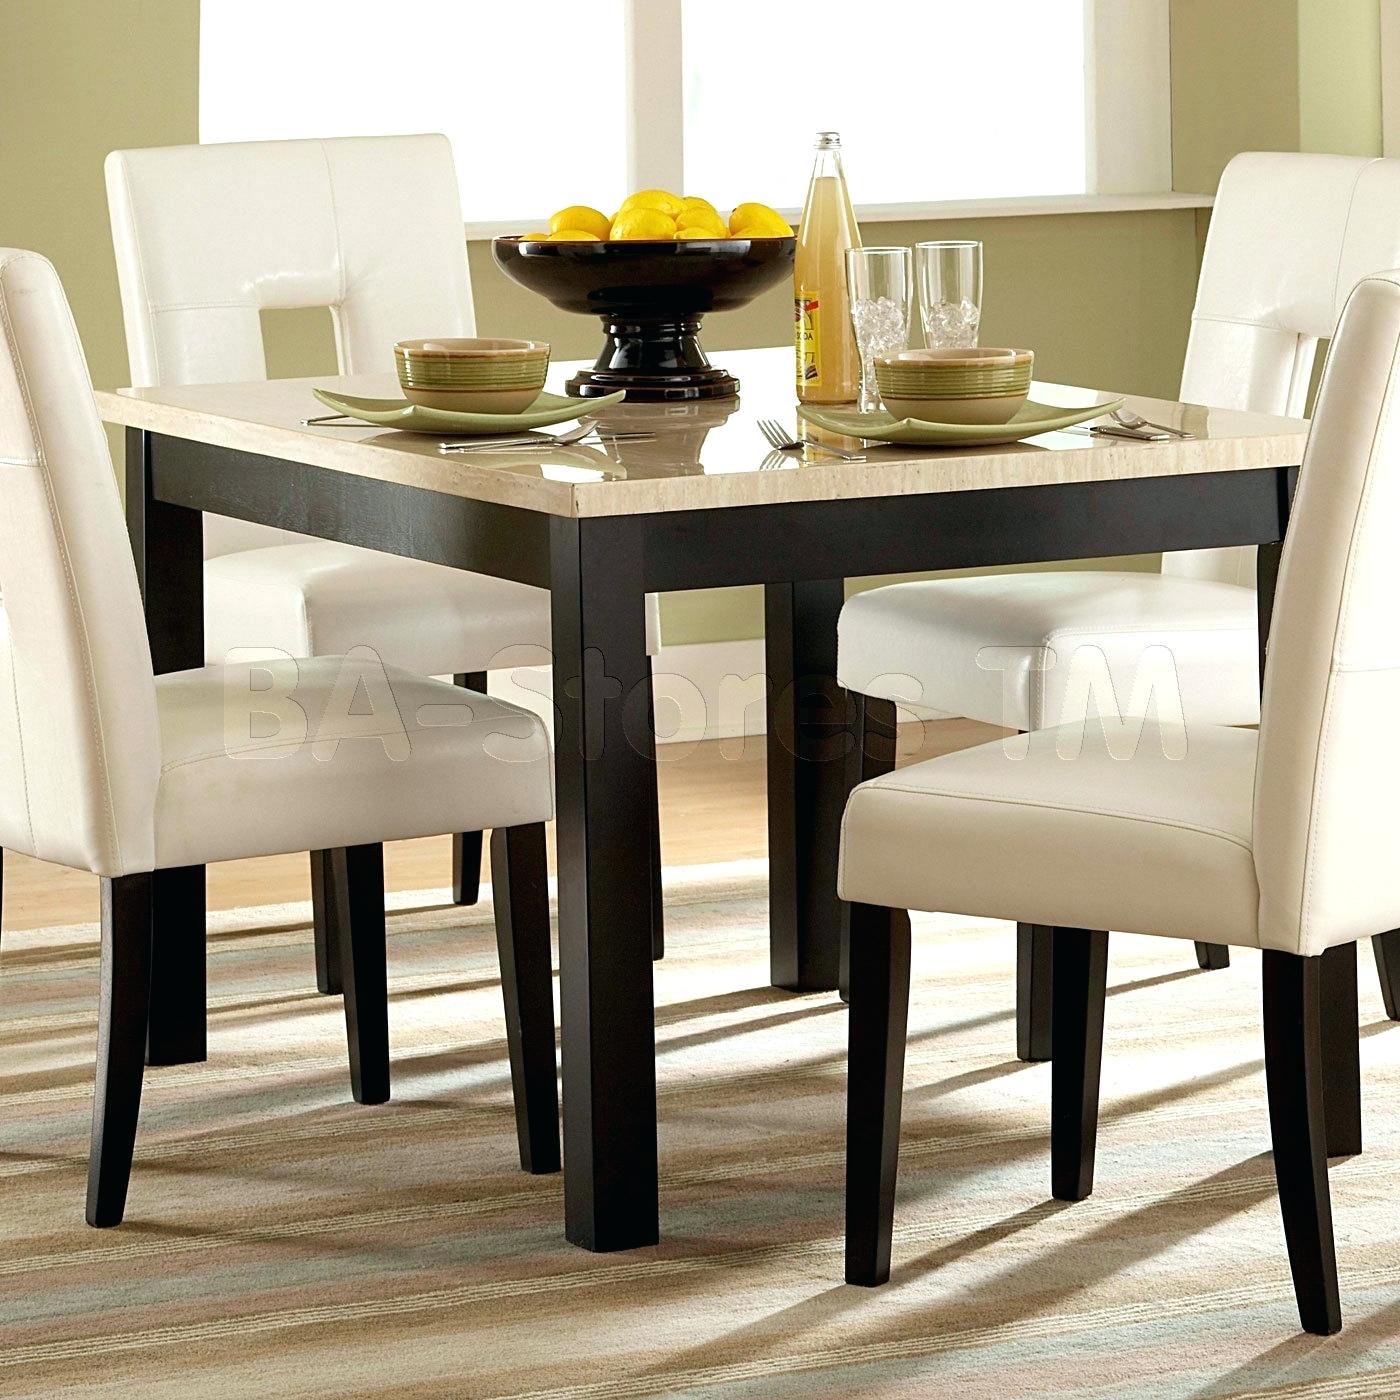 Square dining table seats 12 